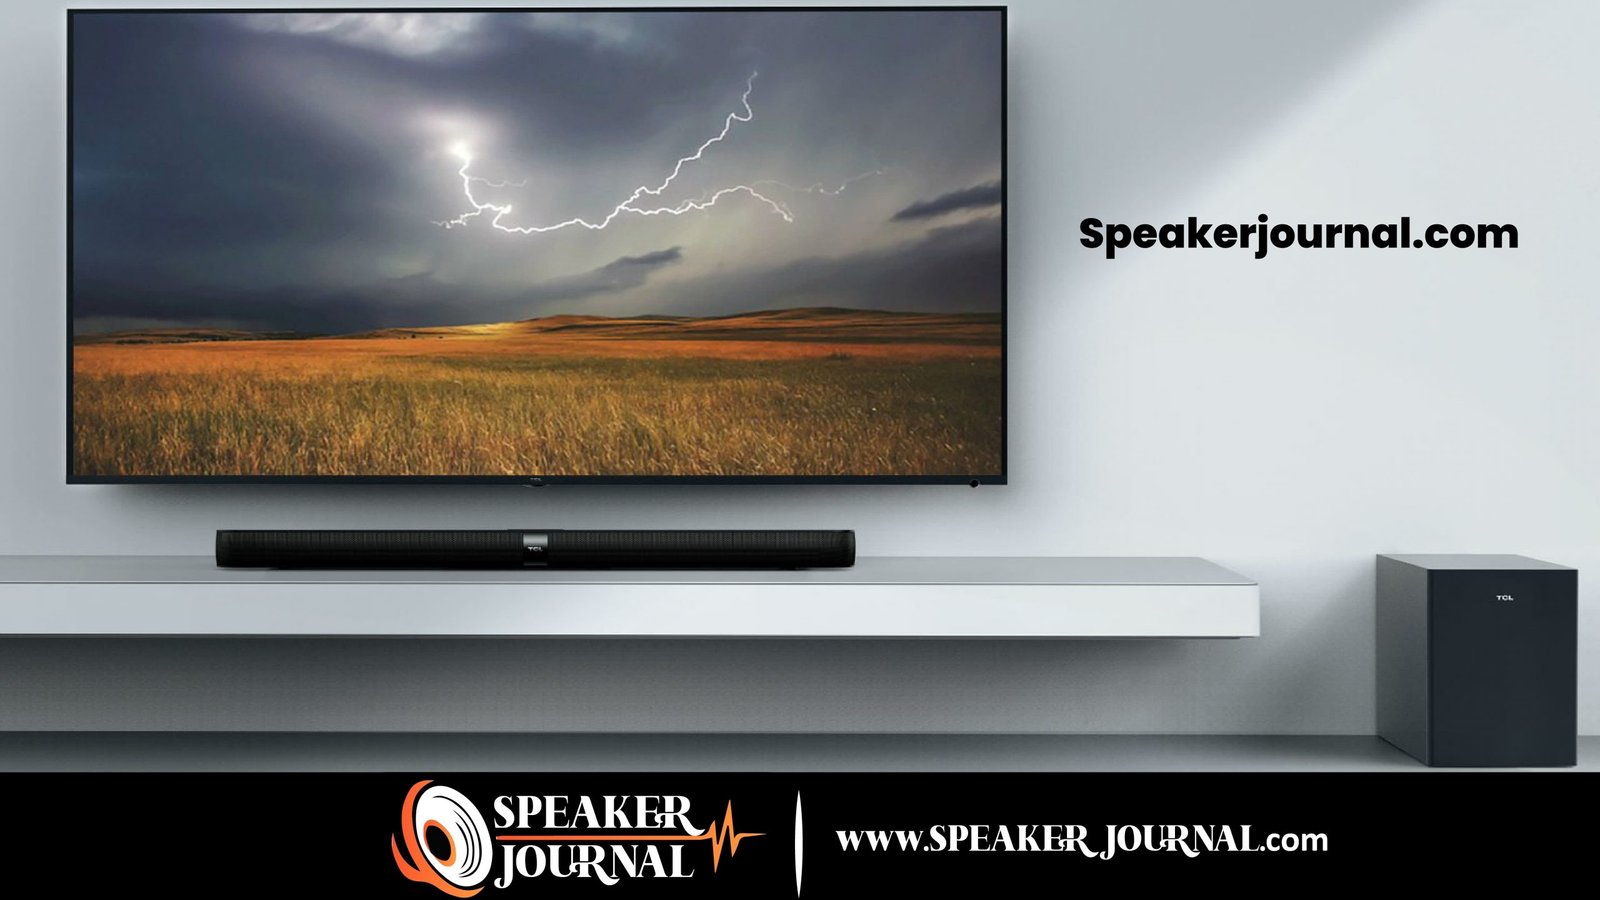 Where To Place A Subwoofer With A Soundbar by speakerjournal.com